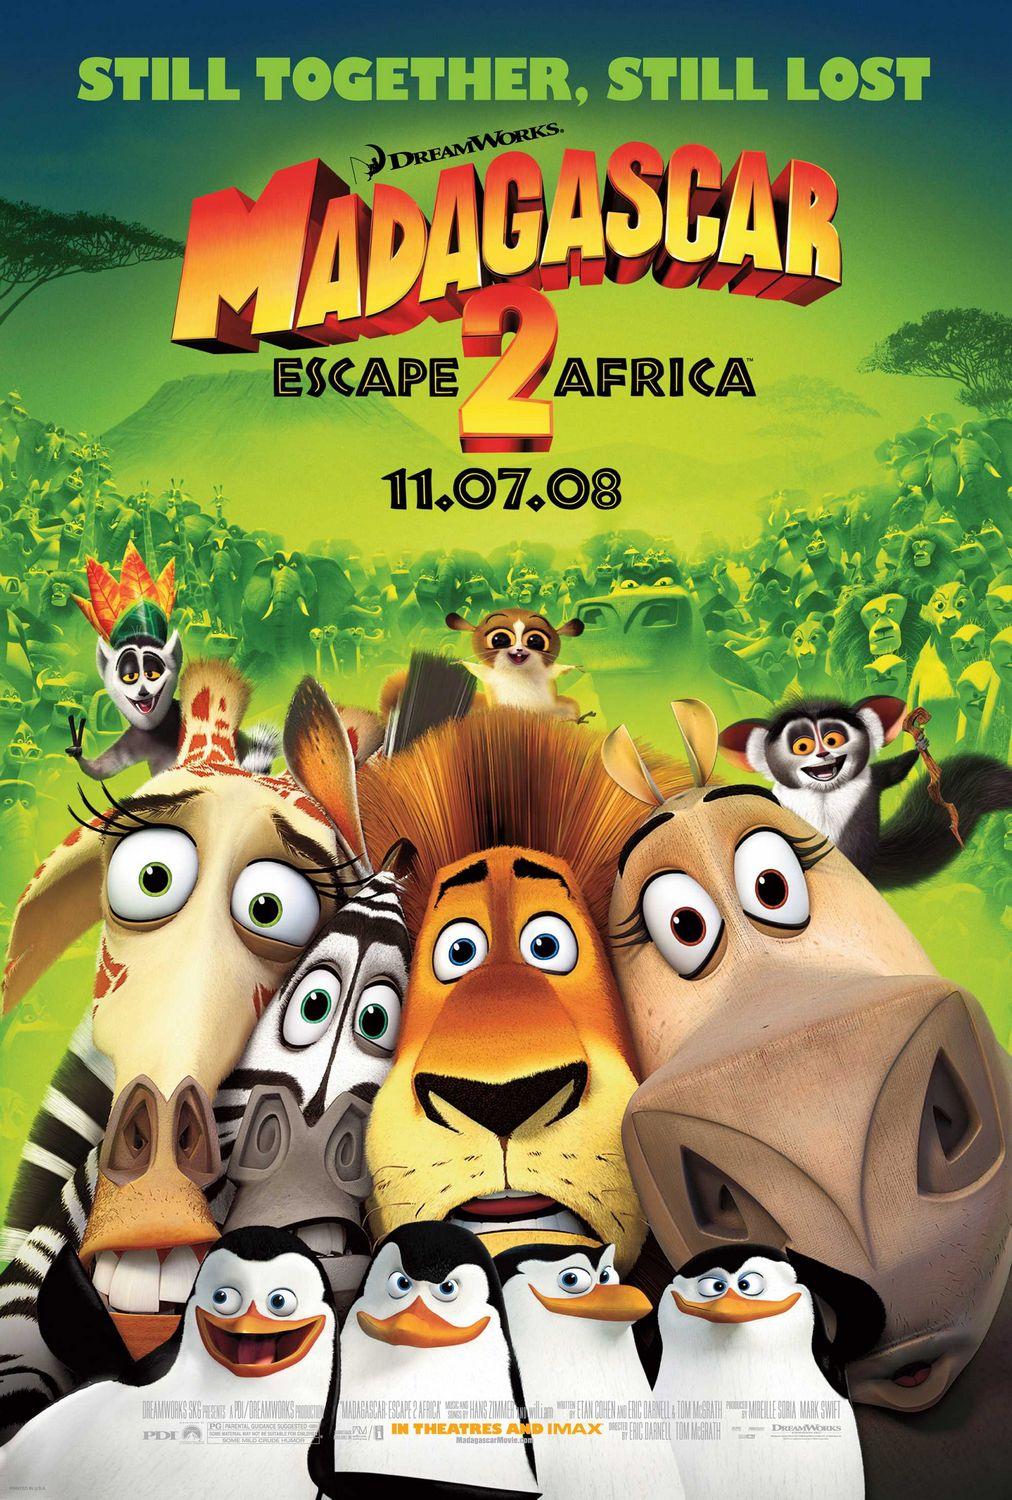 Movie Poster Madagascar Wallpaper Image for iOS 7